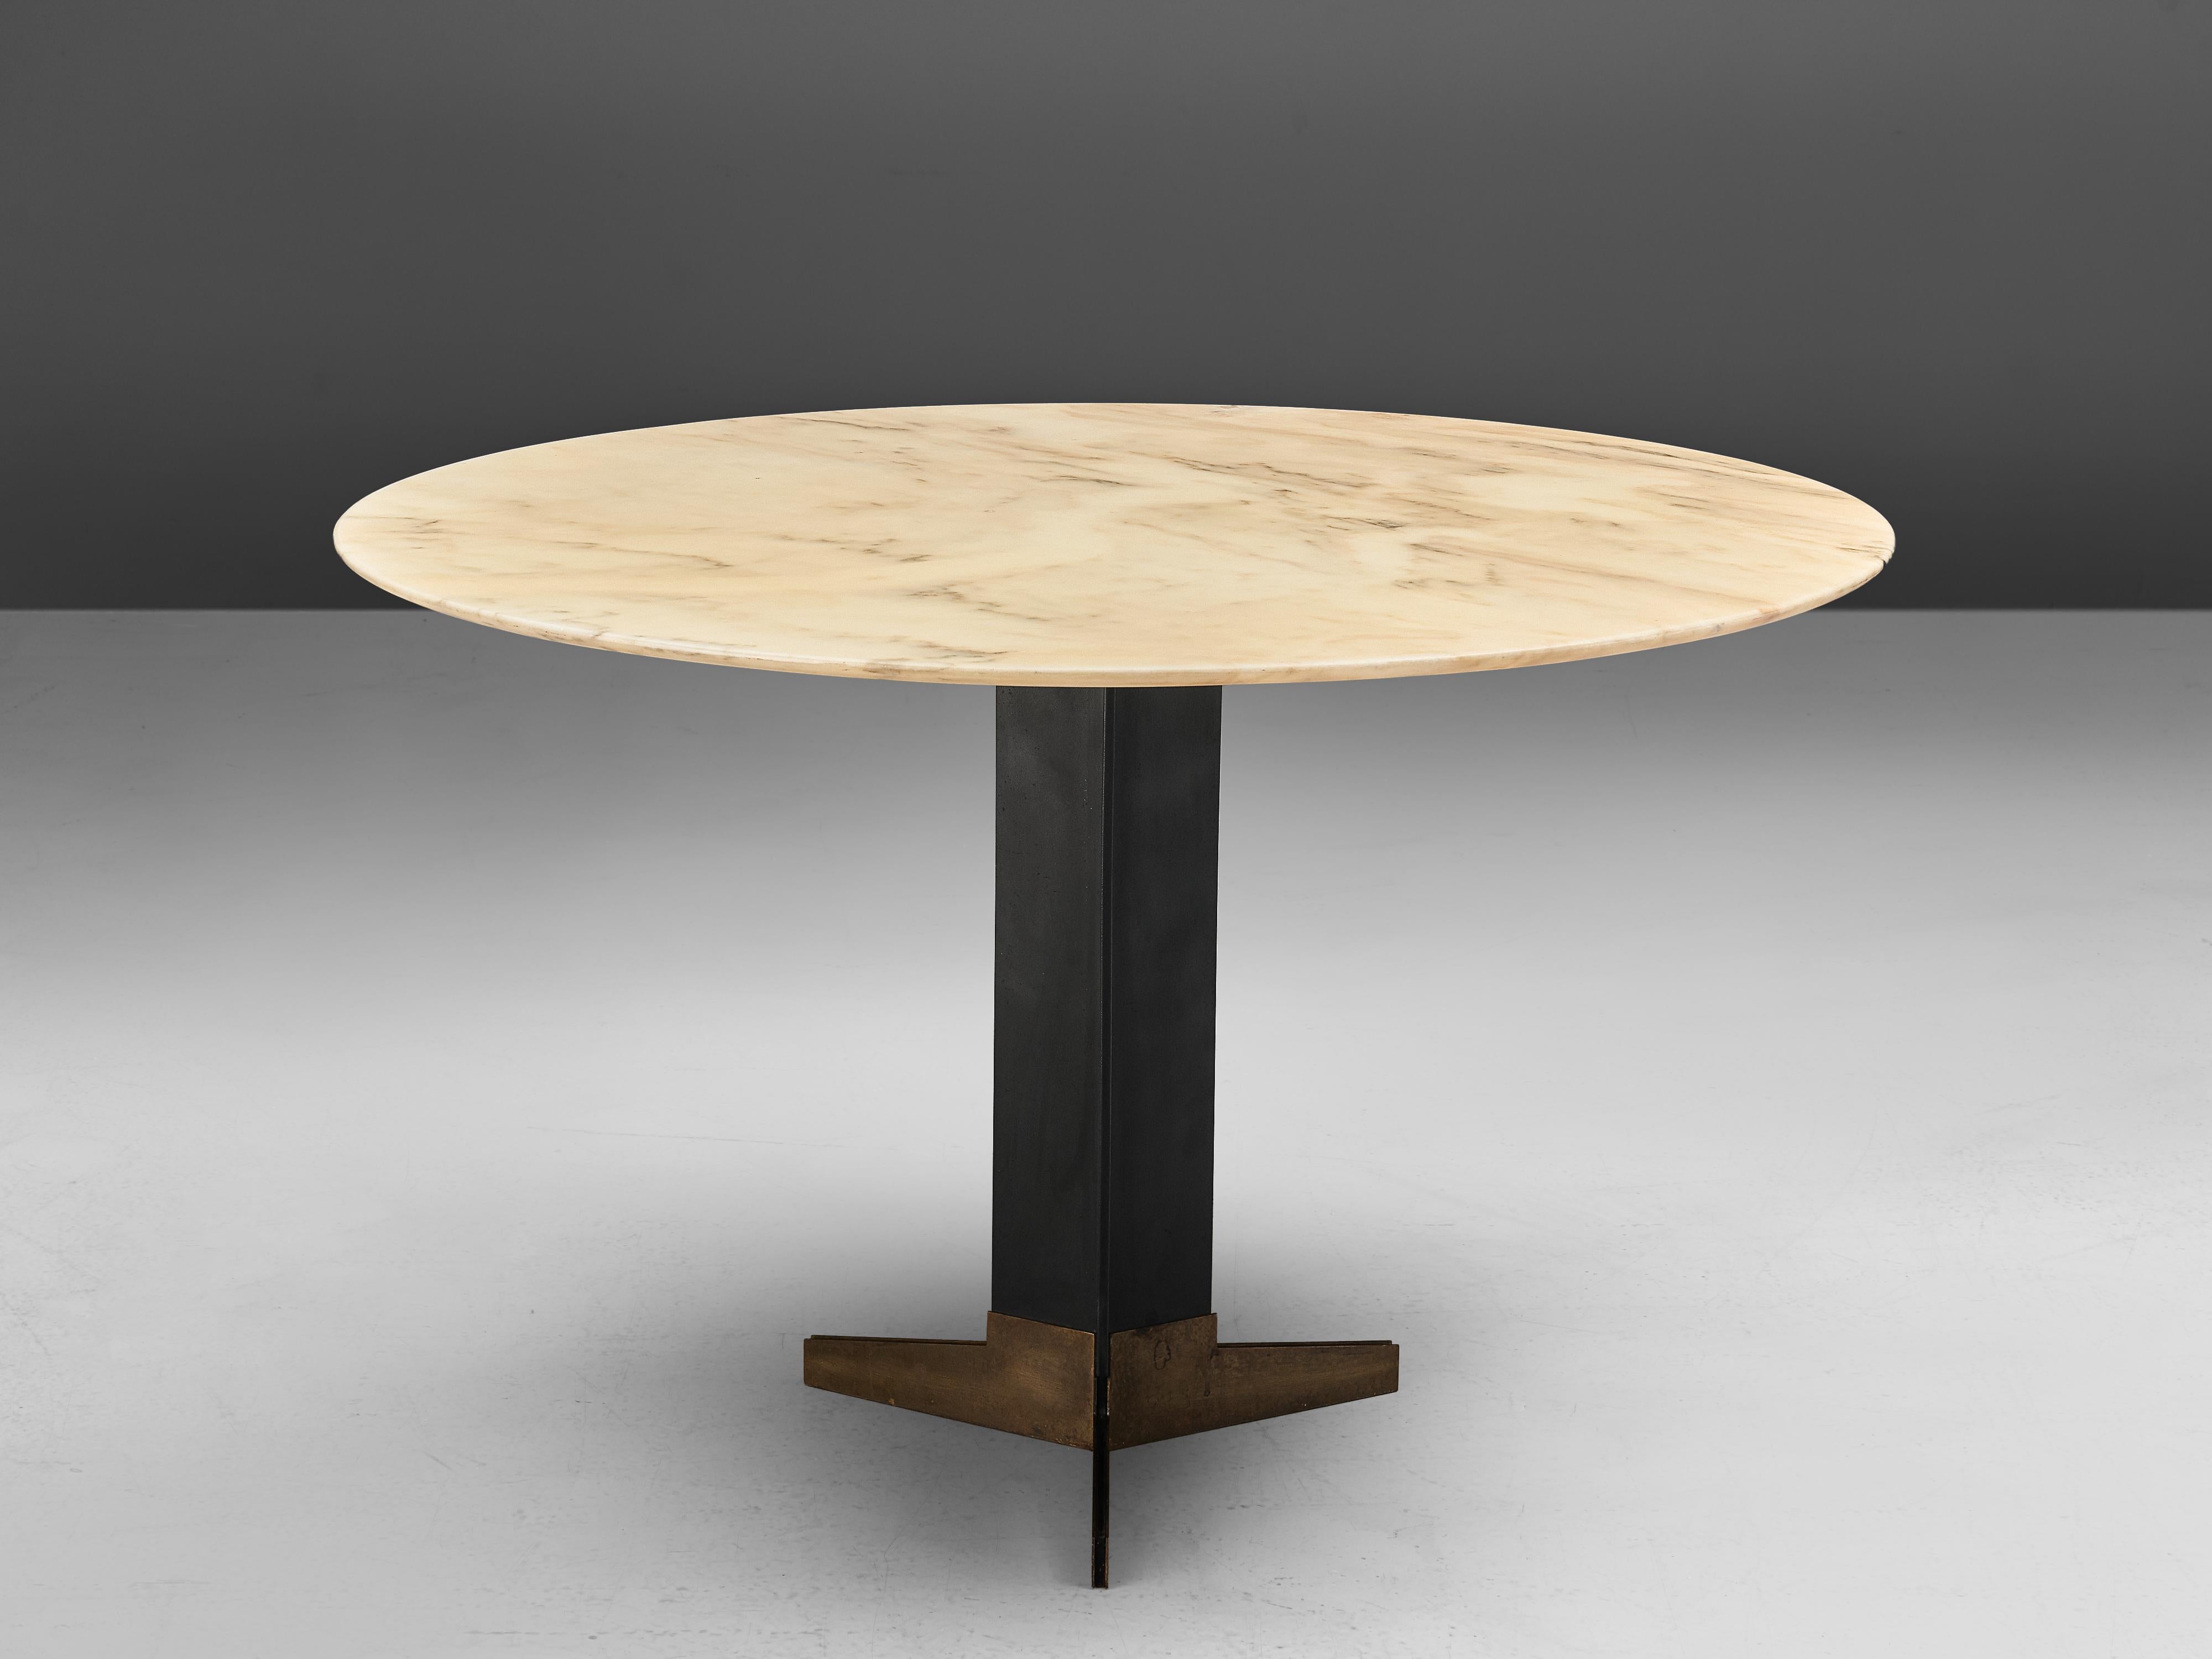 Attributed to Ignazio Gardella, dining table, marble, brass, metal, Italy, circa 1958

Breathtaking round dining or center table that convinces through the stunning mix of materials and colors used. A circular pedestal table with a refined black